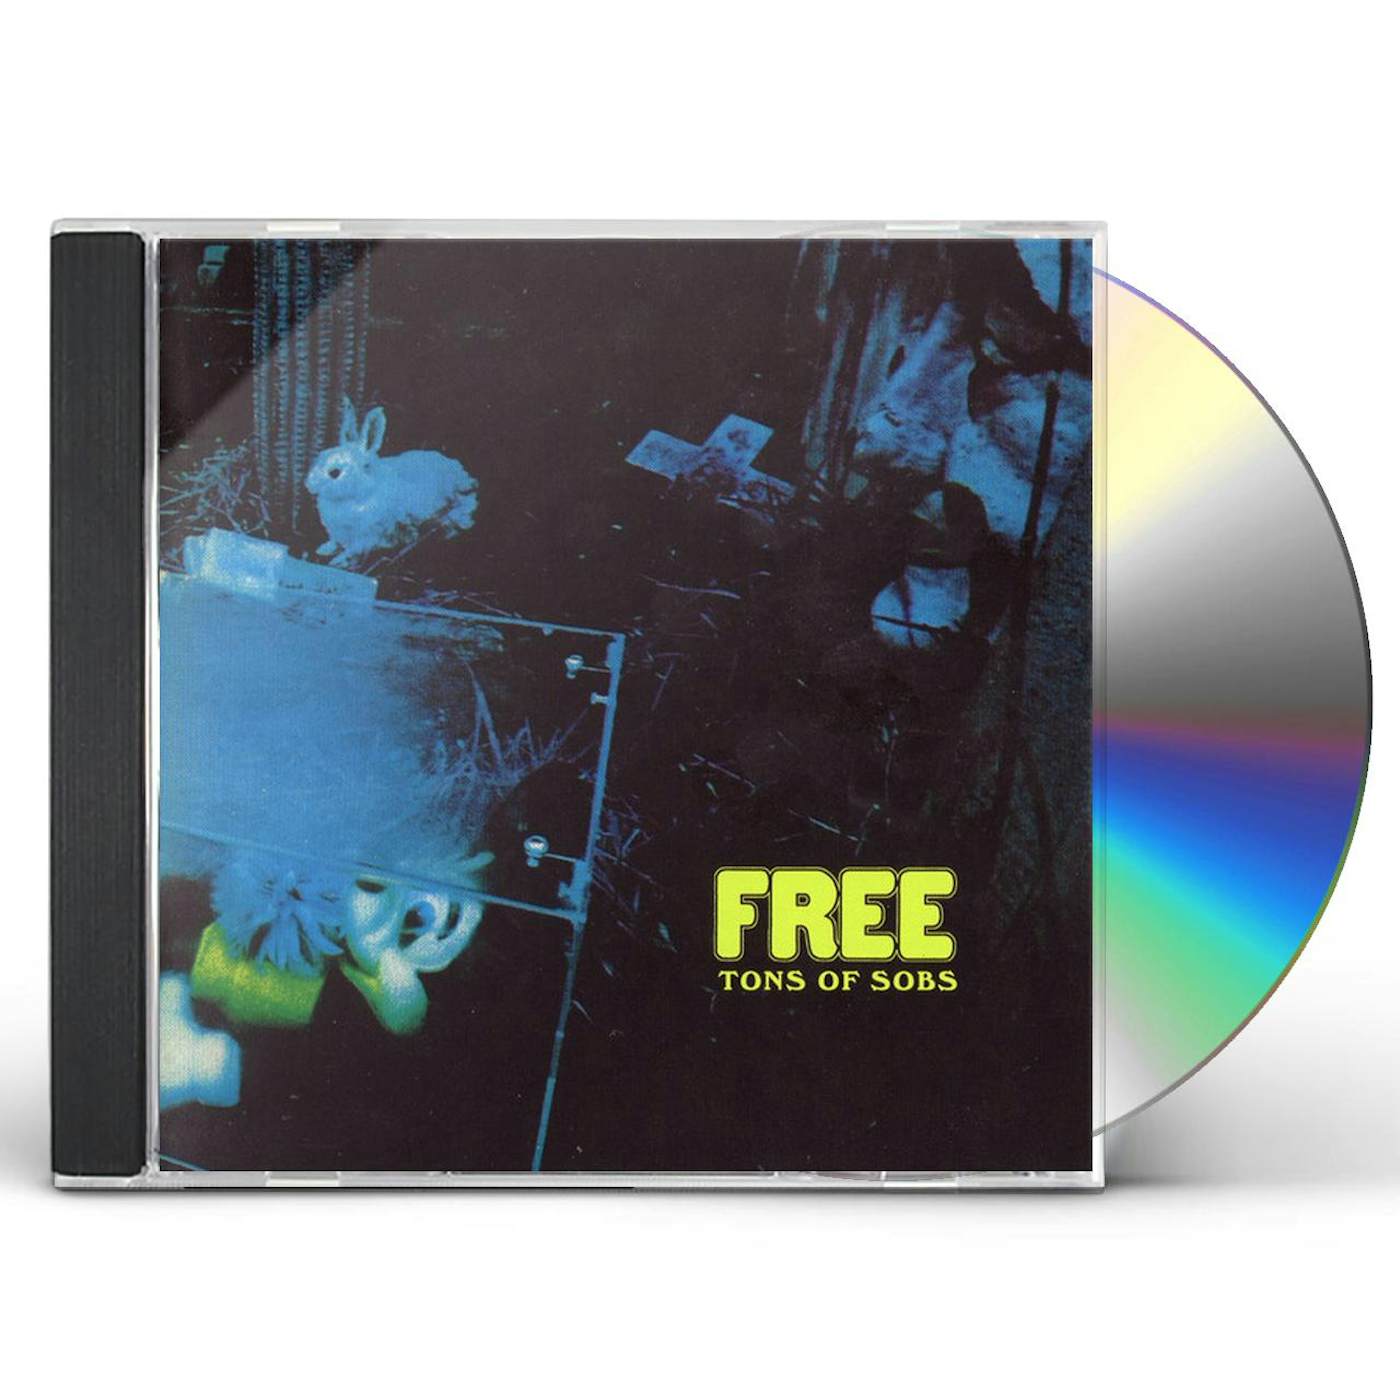 Free TONS OF SOBS CD